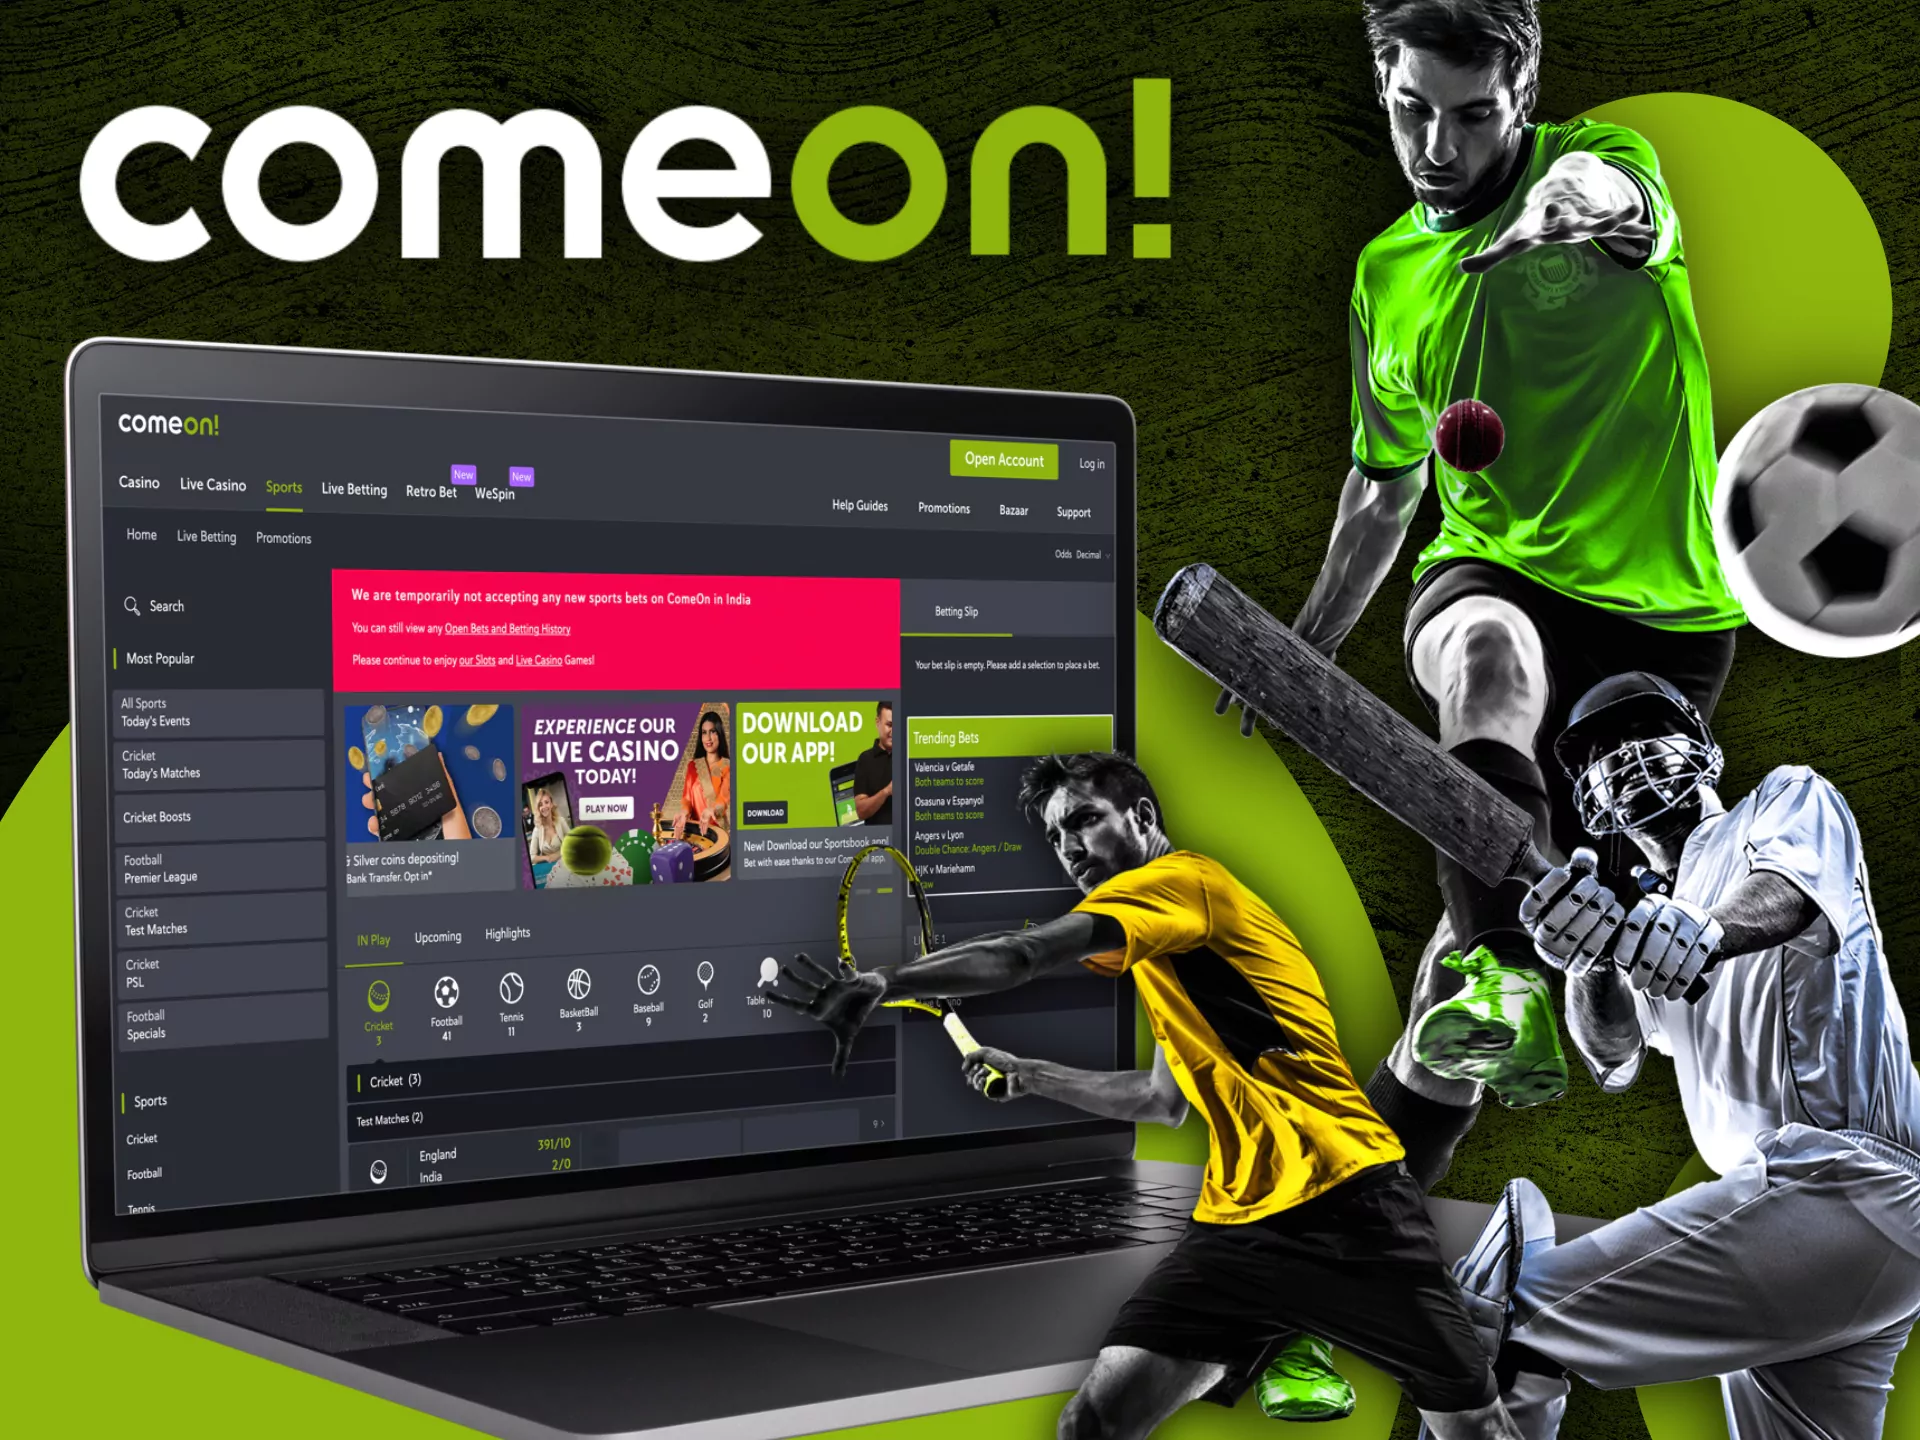 You need to sign up and log in to place your first bet on Comeon.